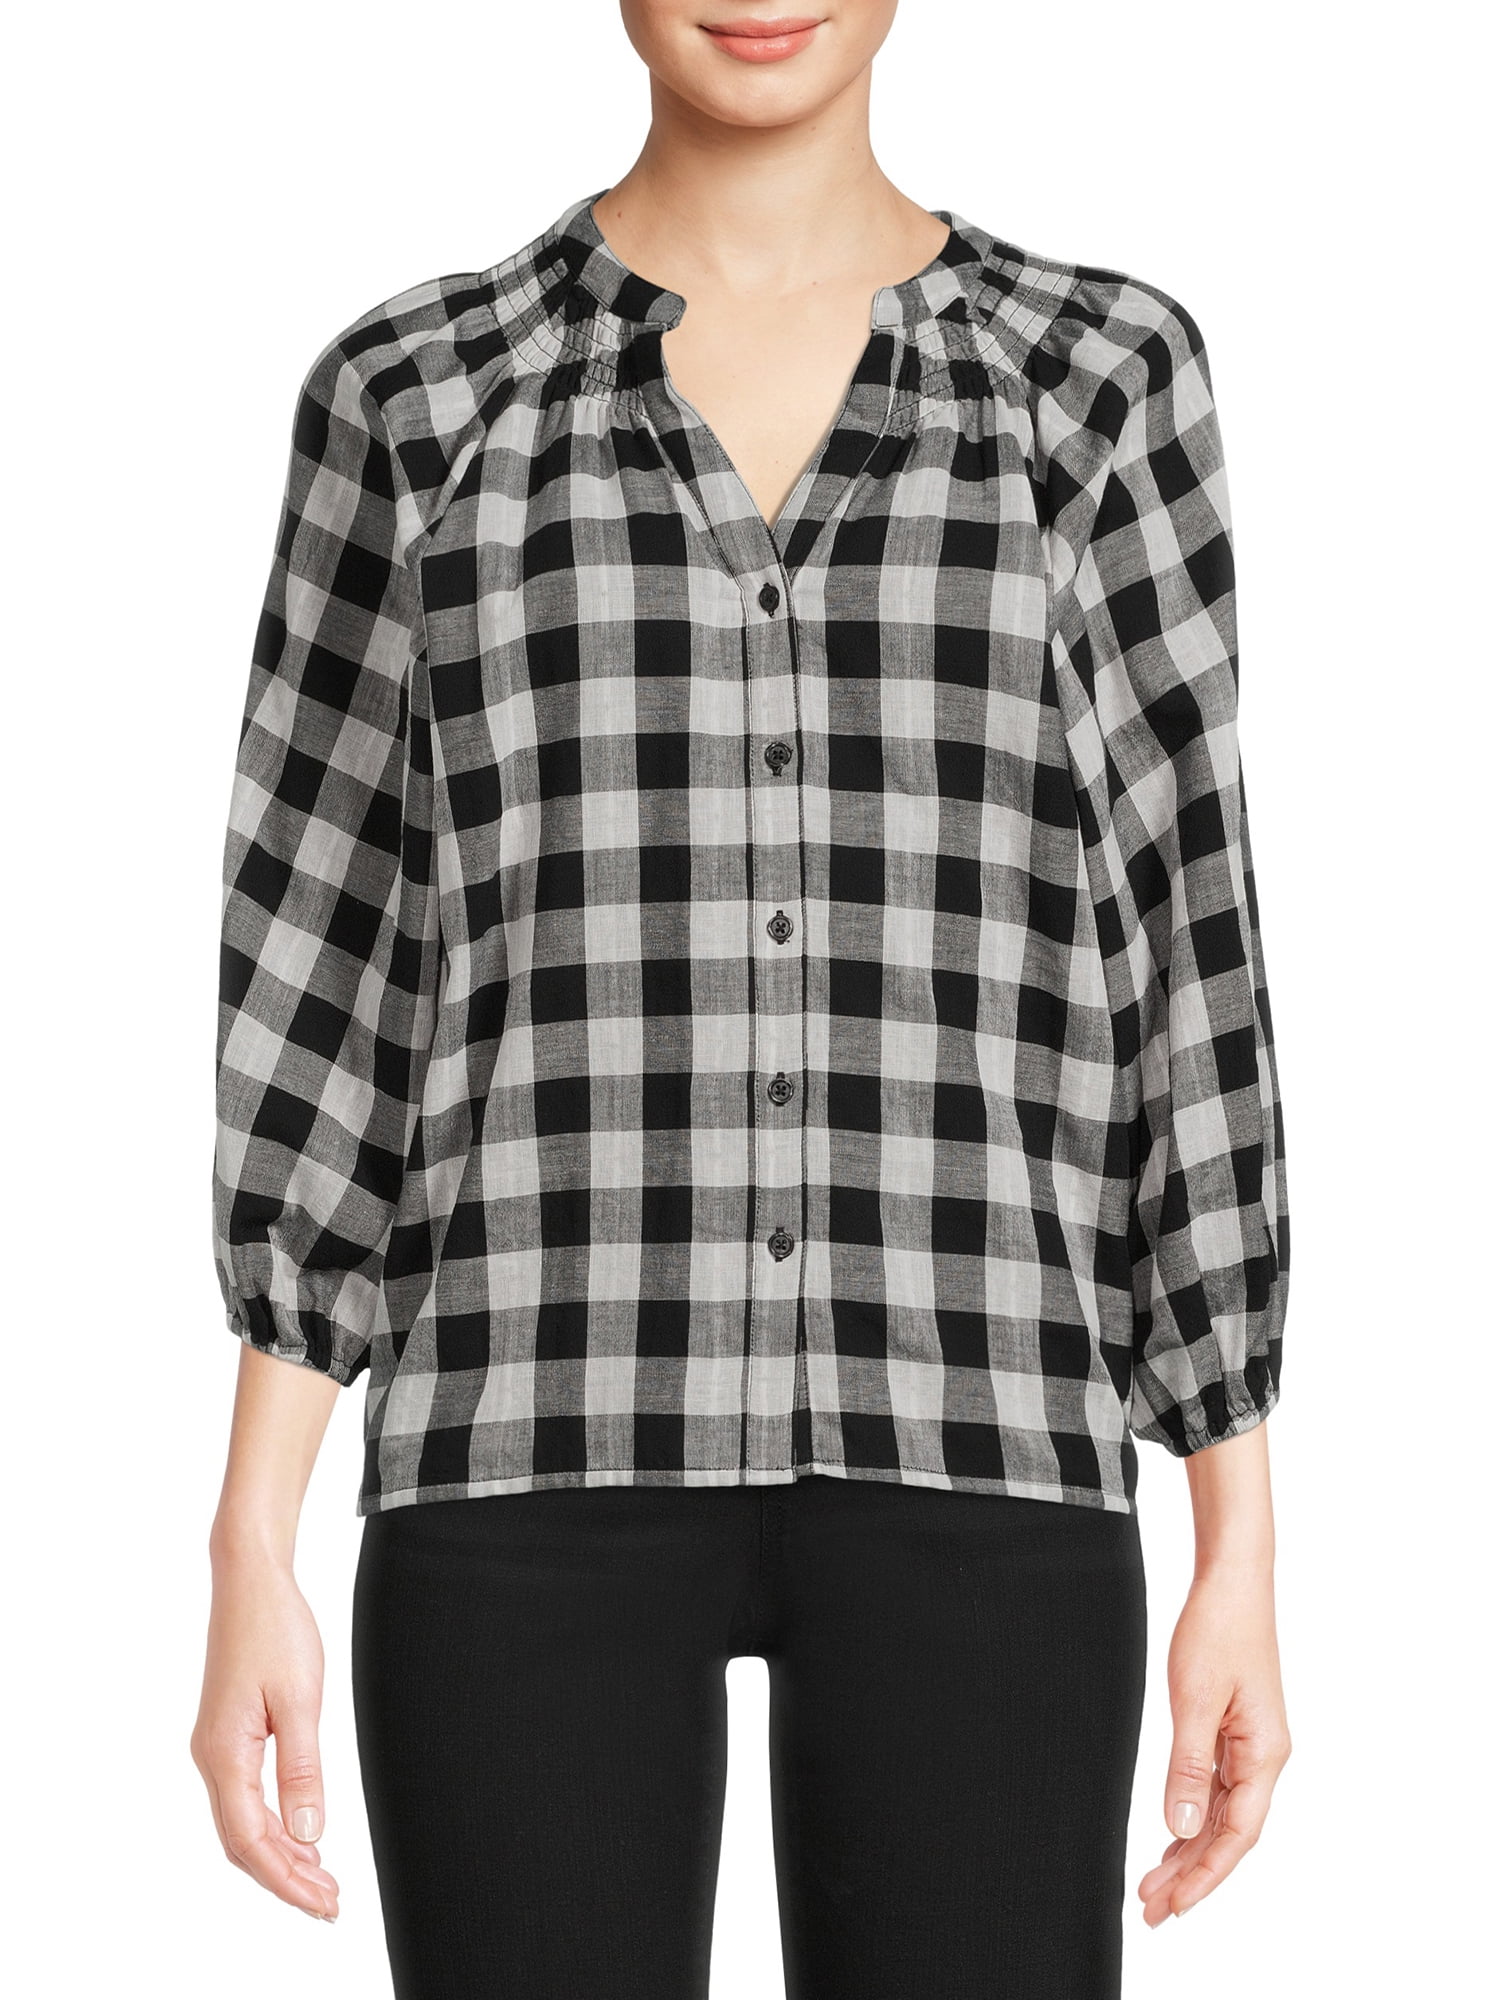 Time and Tru Women's Button Down Top with Puff Sleeves